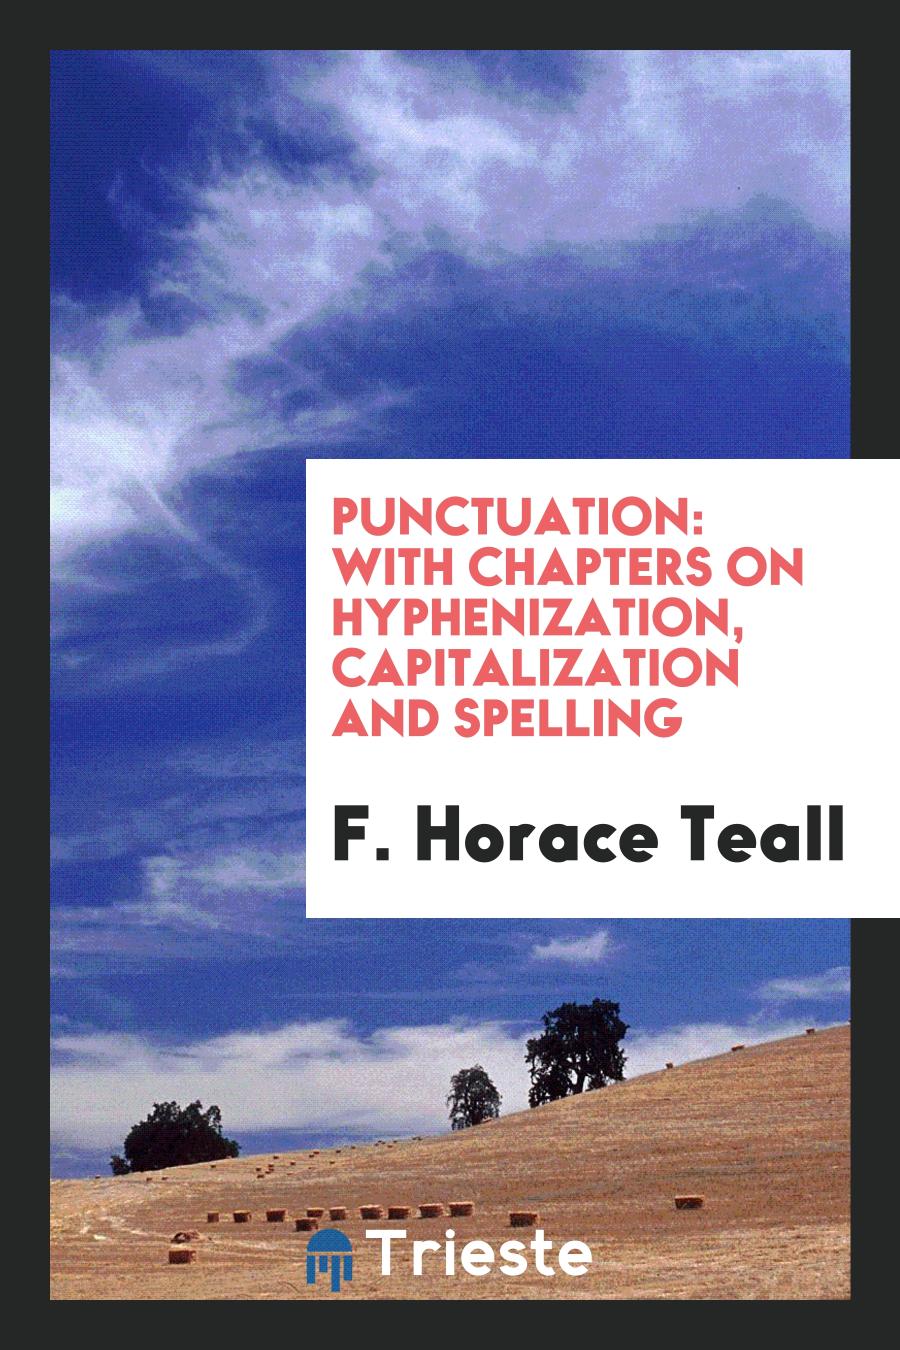 Punctuation: With Chapters on Hyphenization, Capitalization and Spelling